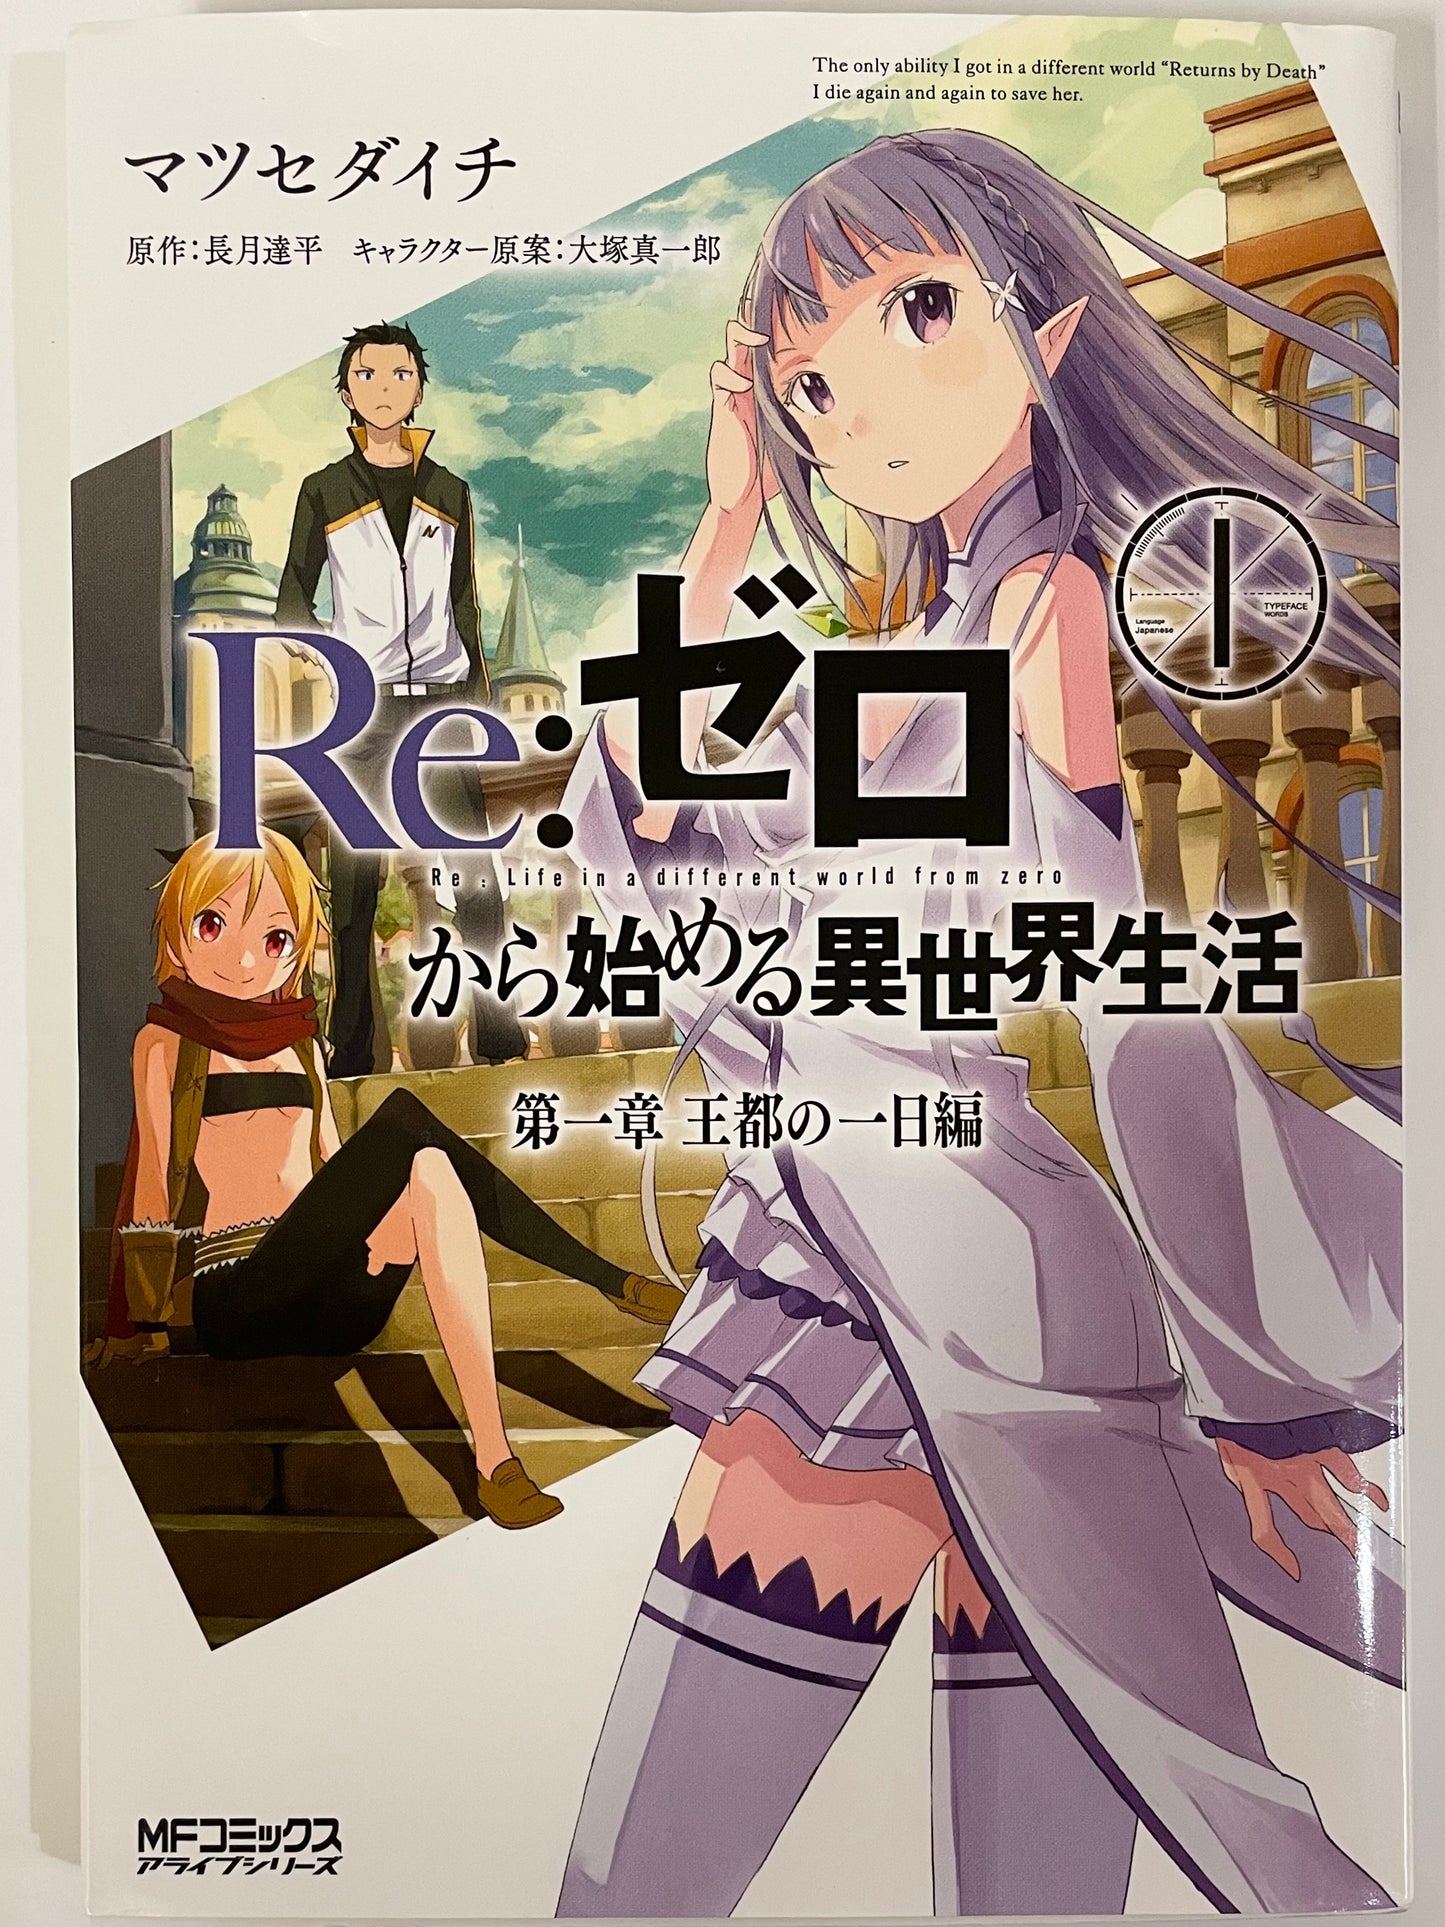 Re:Zero Ep-1 Vol.1-Starting Life In Another World-Official Japanese Edition